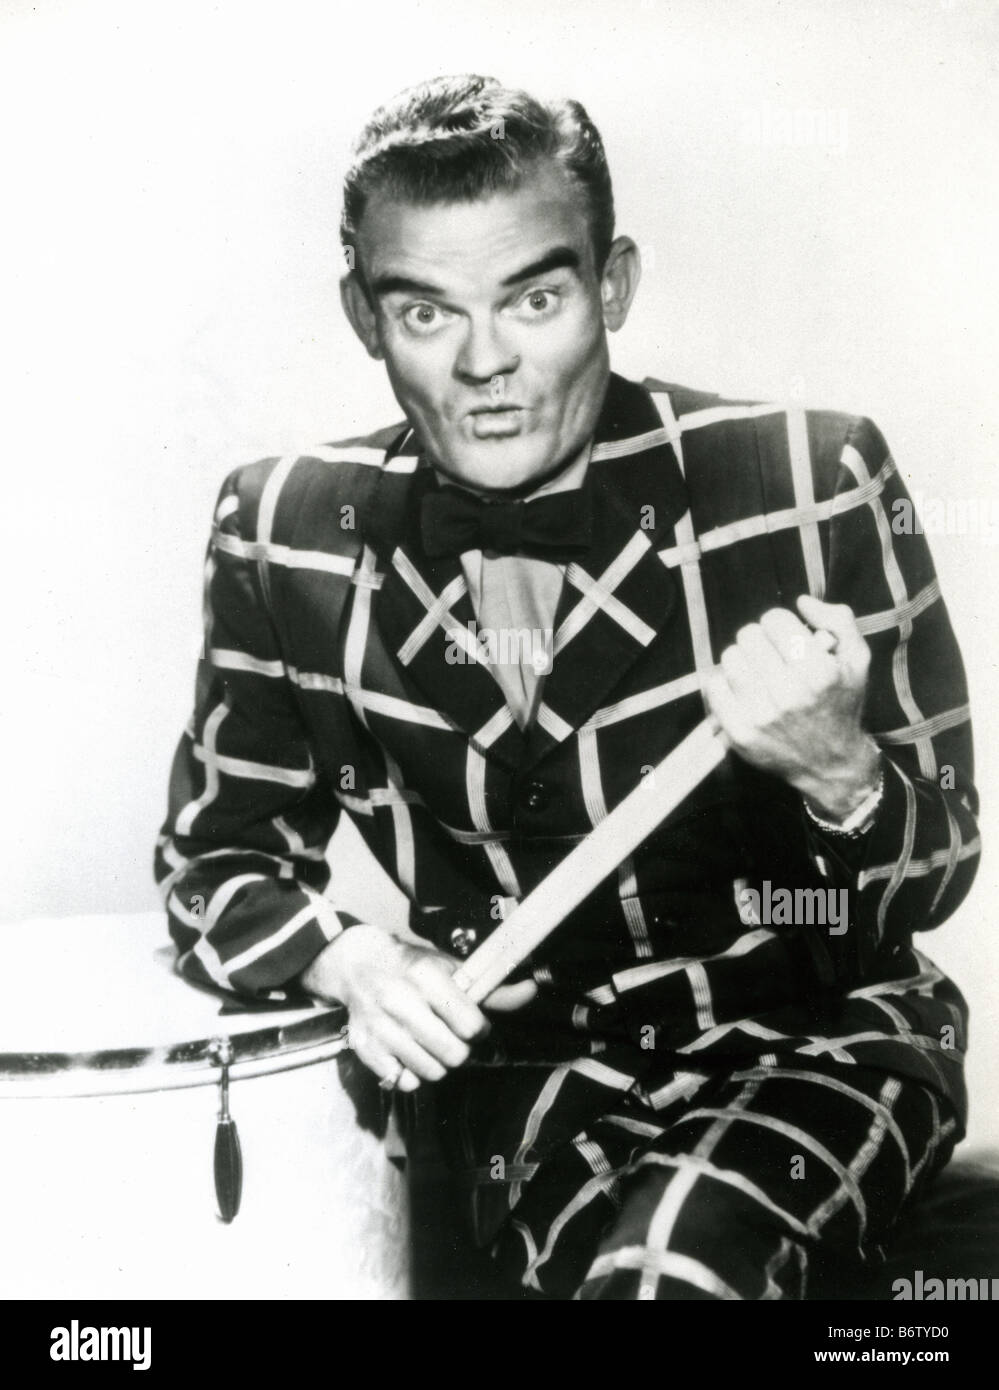 SPIKE JONES US band leader of 1930s and 40s Stock Photo